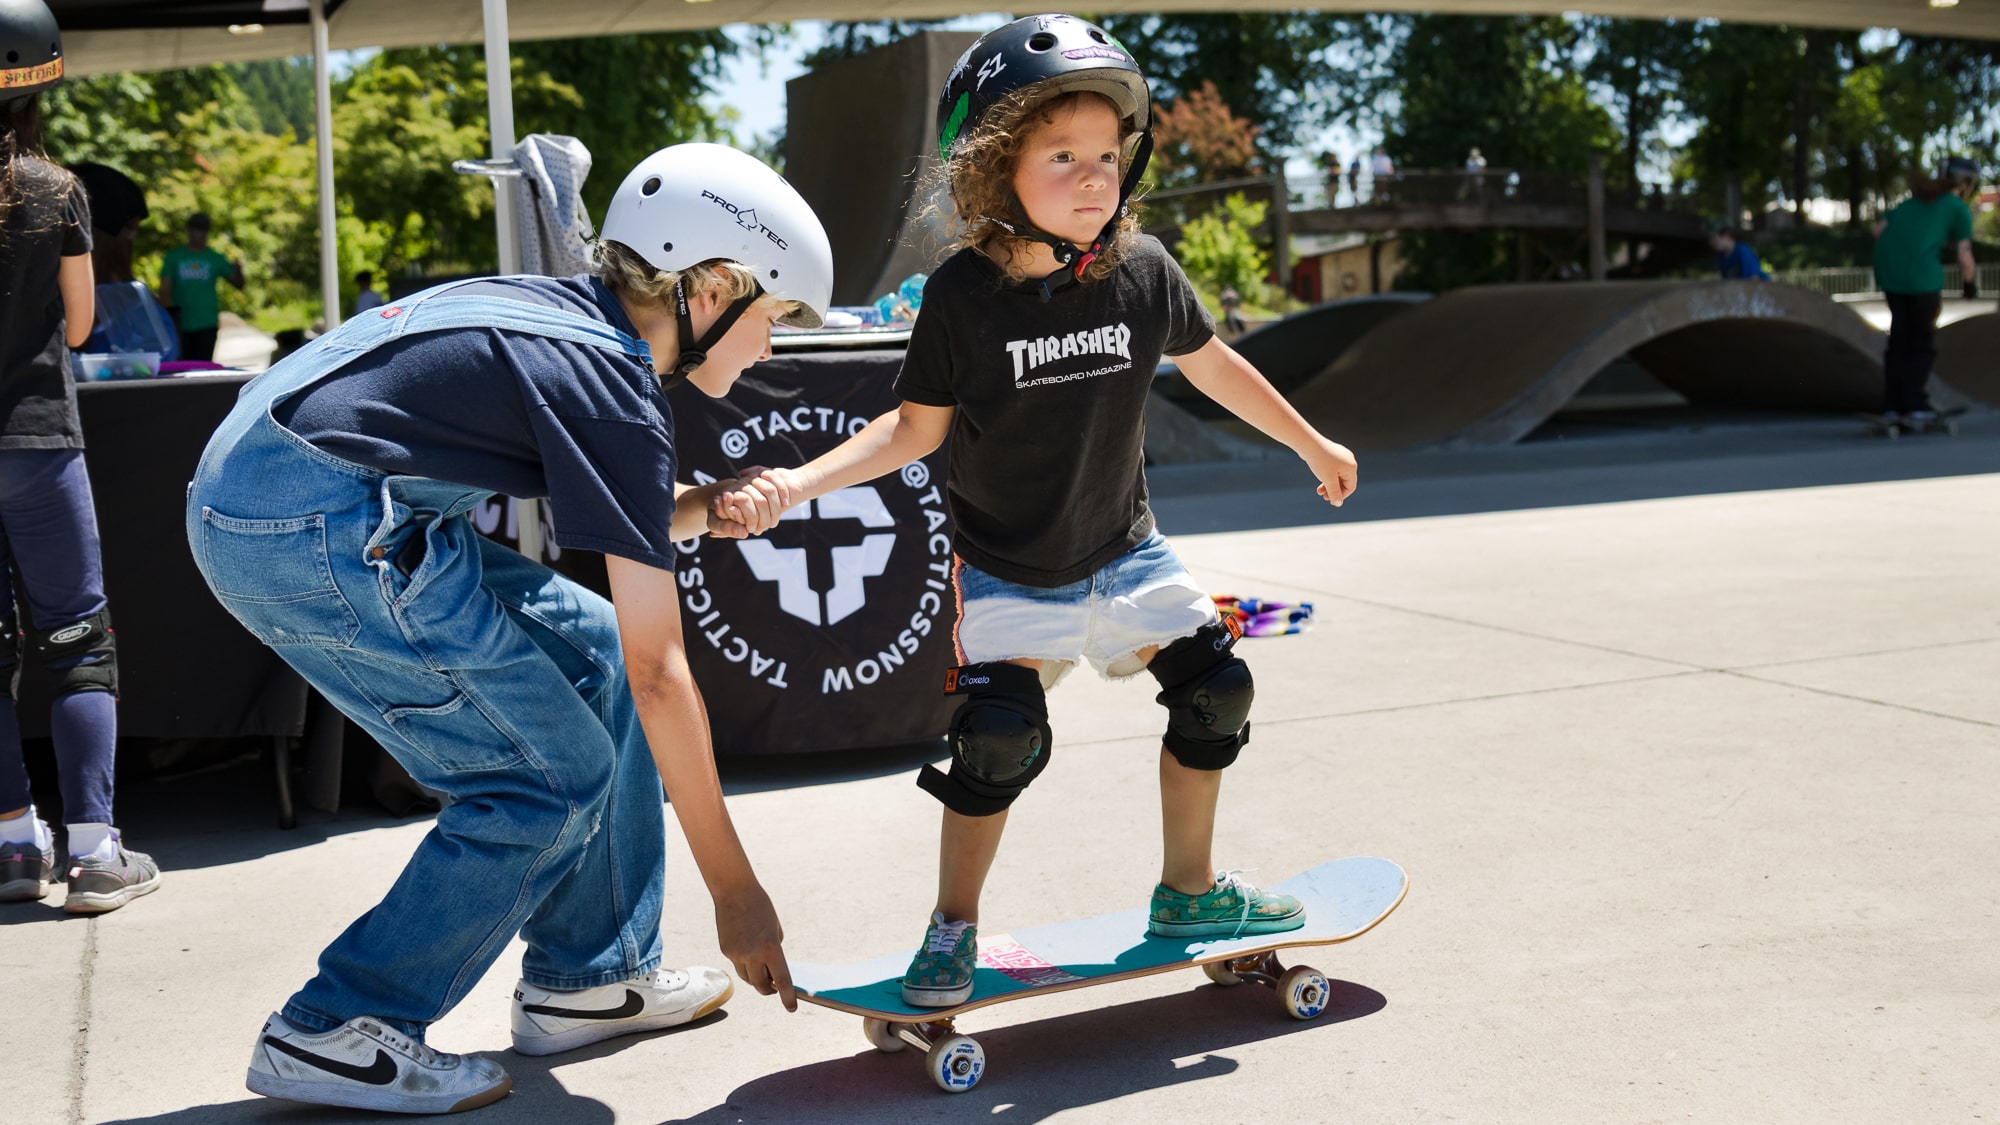 Safety gear for skateboarding — What to get and where to get it